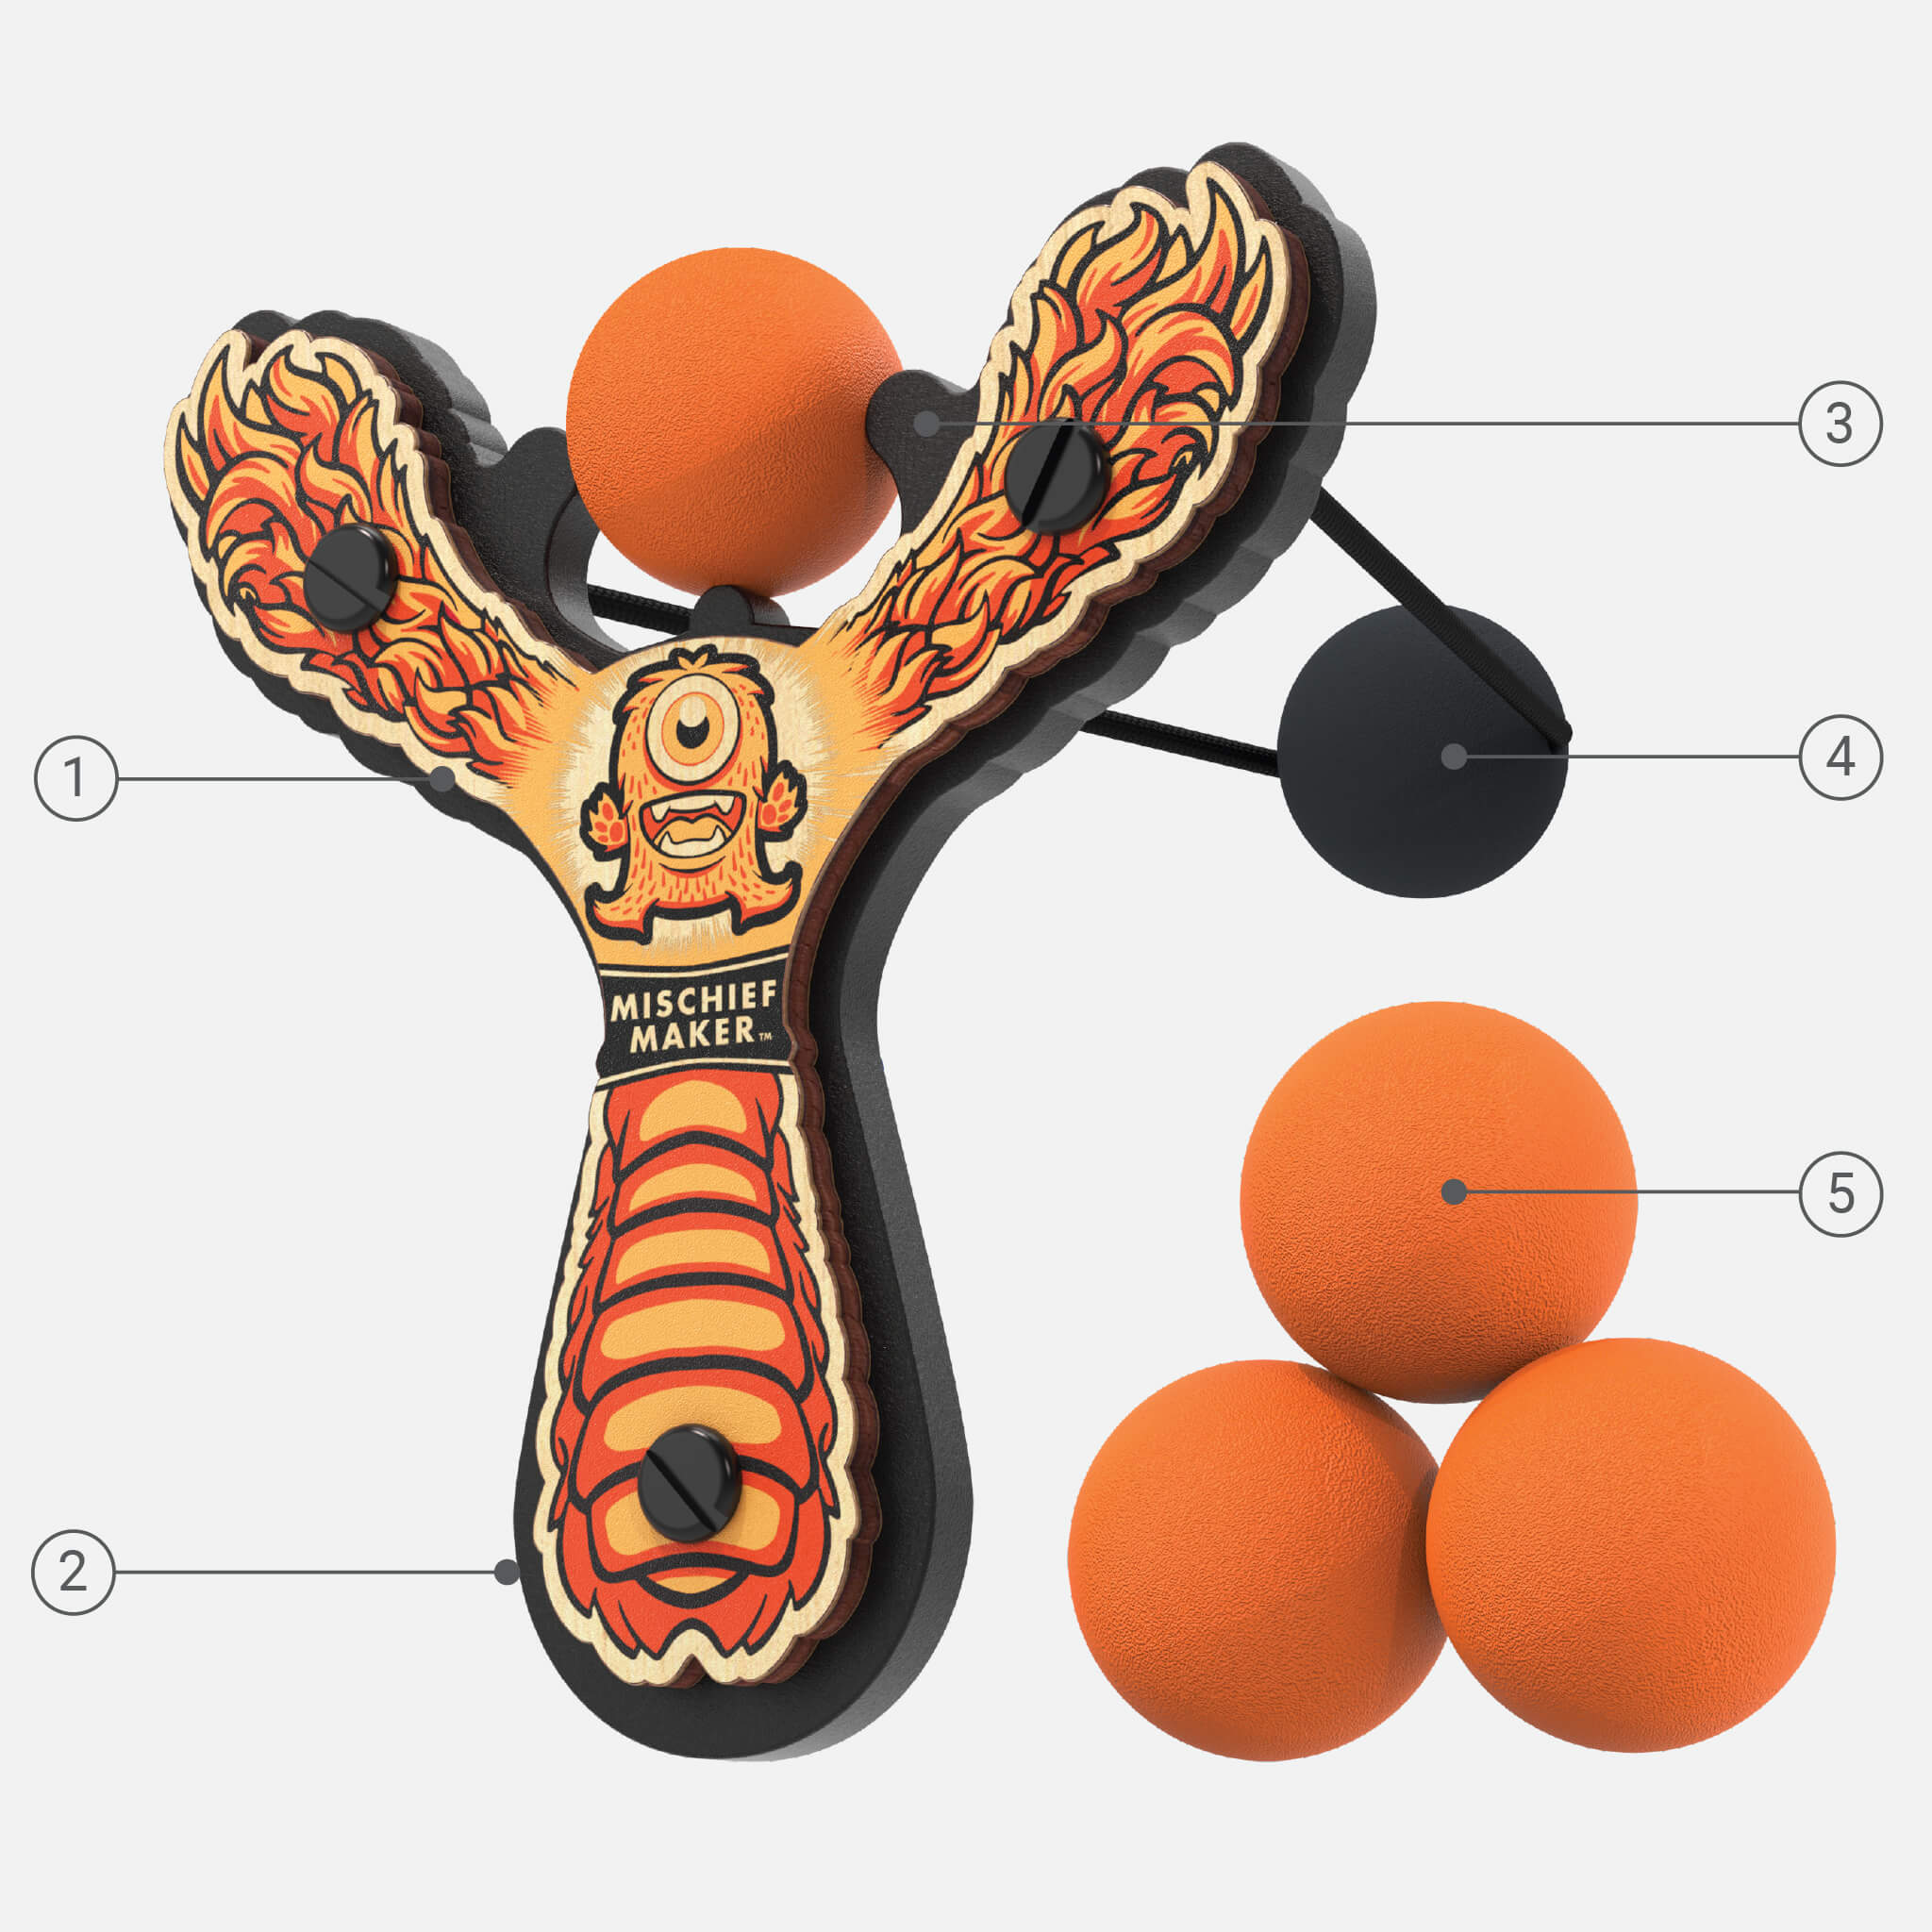 Orange Monster toy slingshot with 4 soft foam balls and detail callouts. Mischief Maker by Mighty Fun!